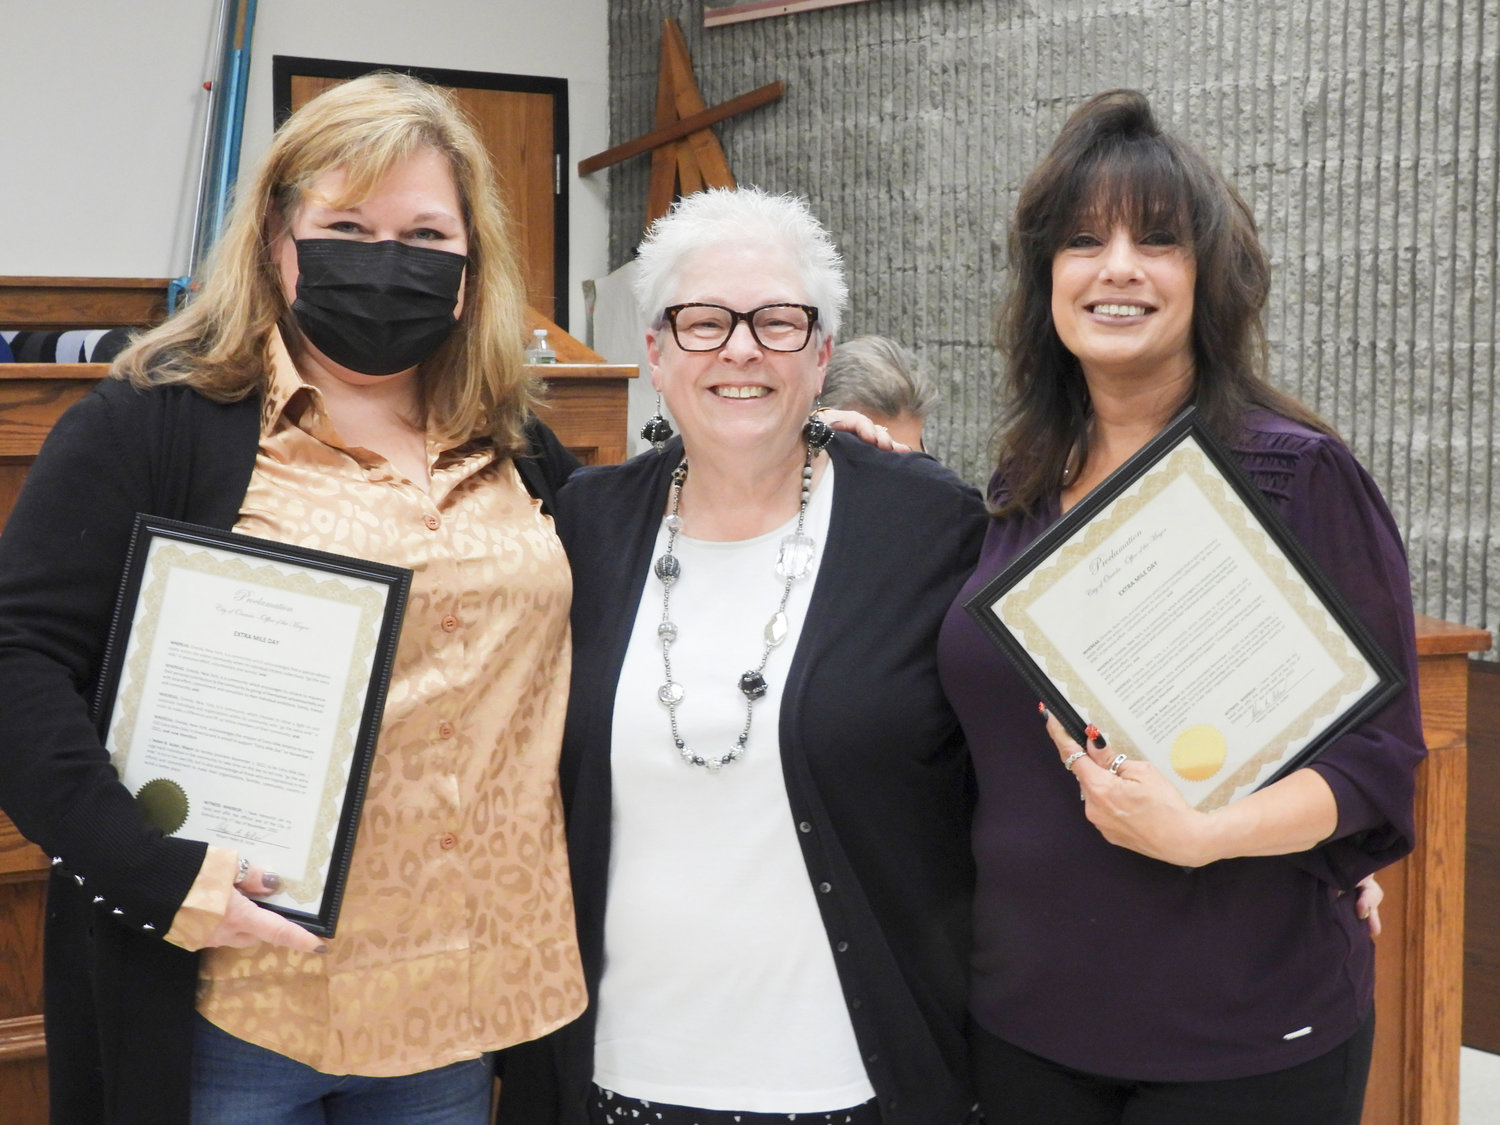 Mayor Helen Acker, center, presents the Extra Mile Day proclamations to Stacy Jones, left, of Oneida Office Supply and Lori Seef of Bella Vita at the Tuesday, Nov. 1 Common Council meeting. The Extra Mile proclamation is given to individuals and organizations that go above and beyond for the city of Oneida